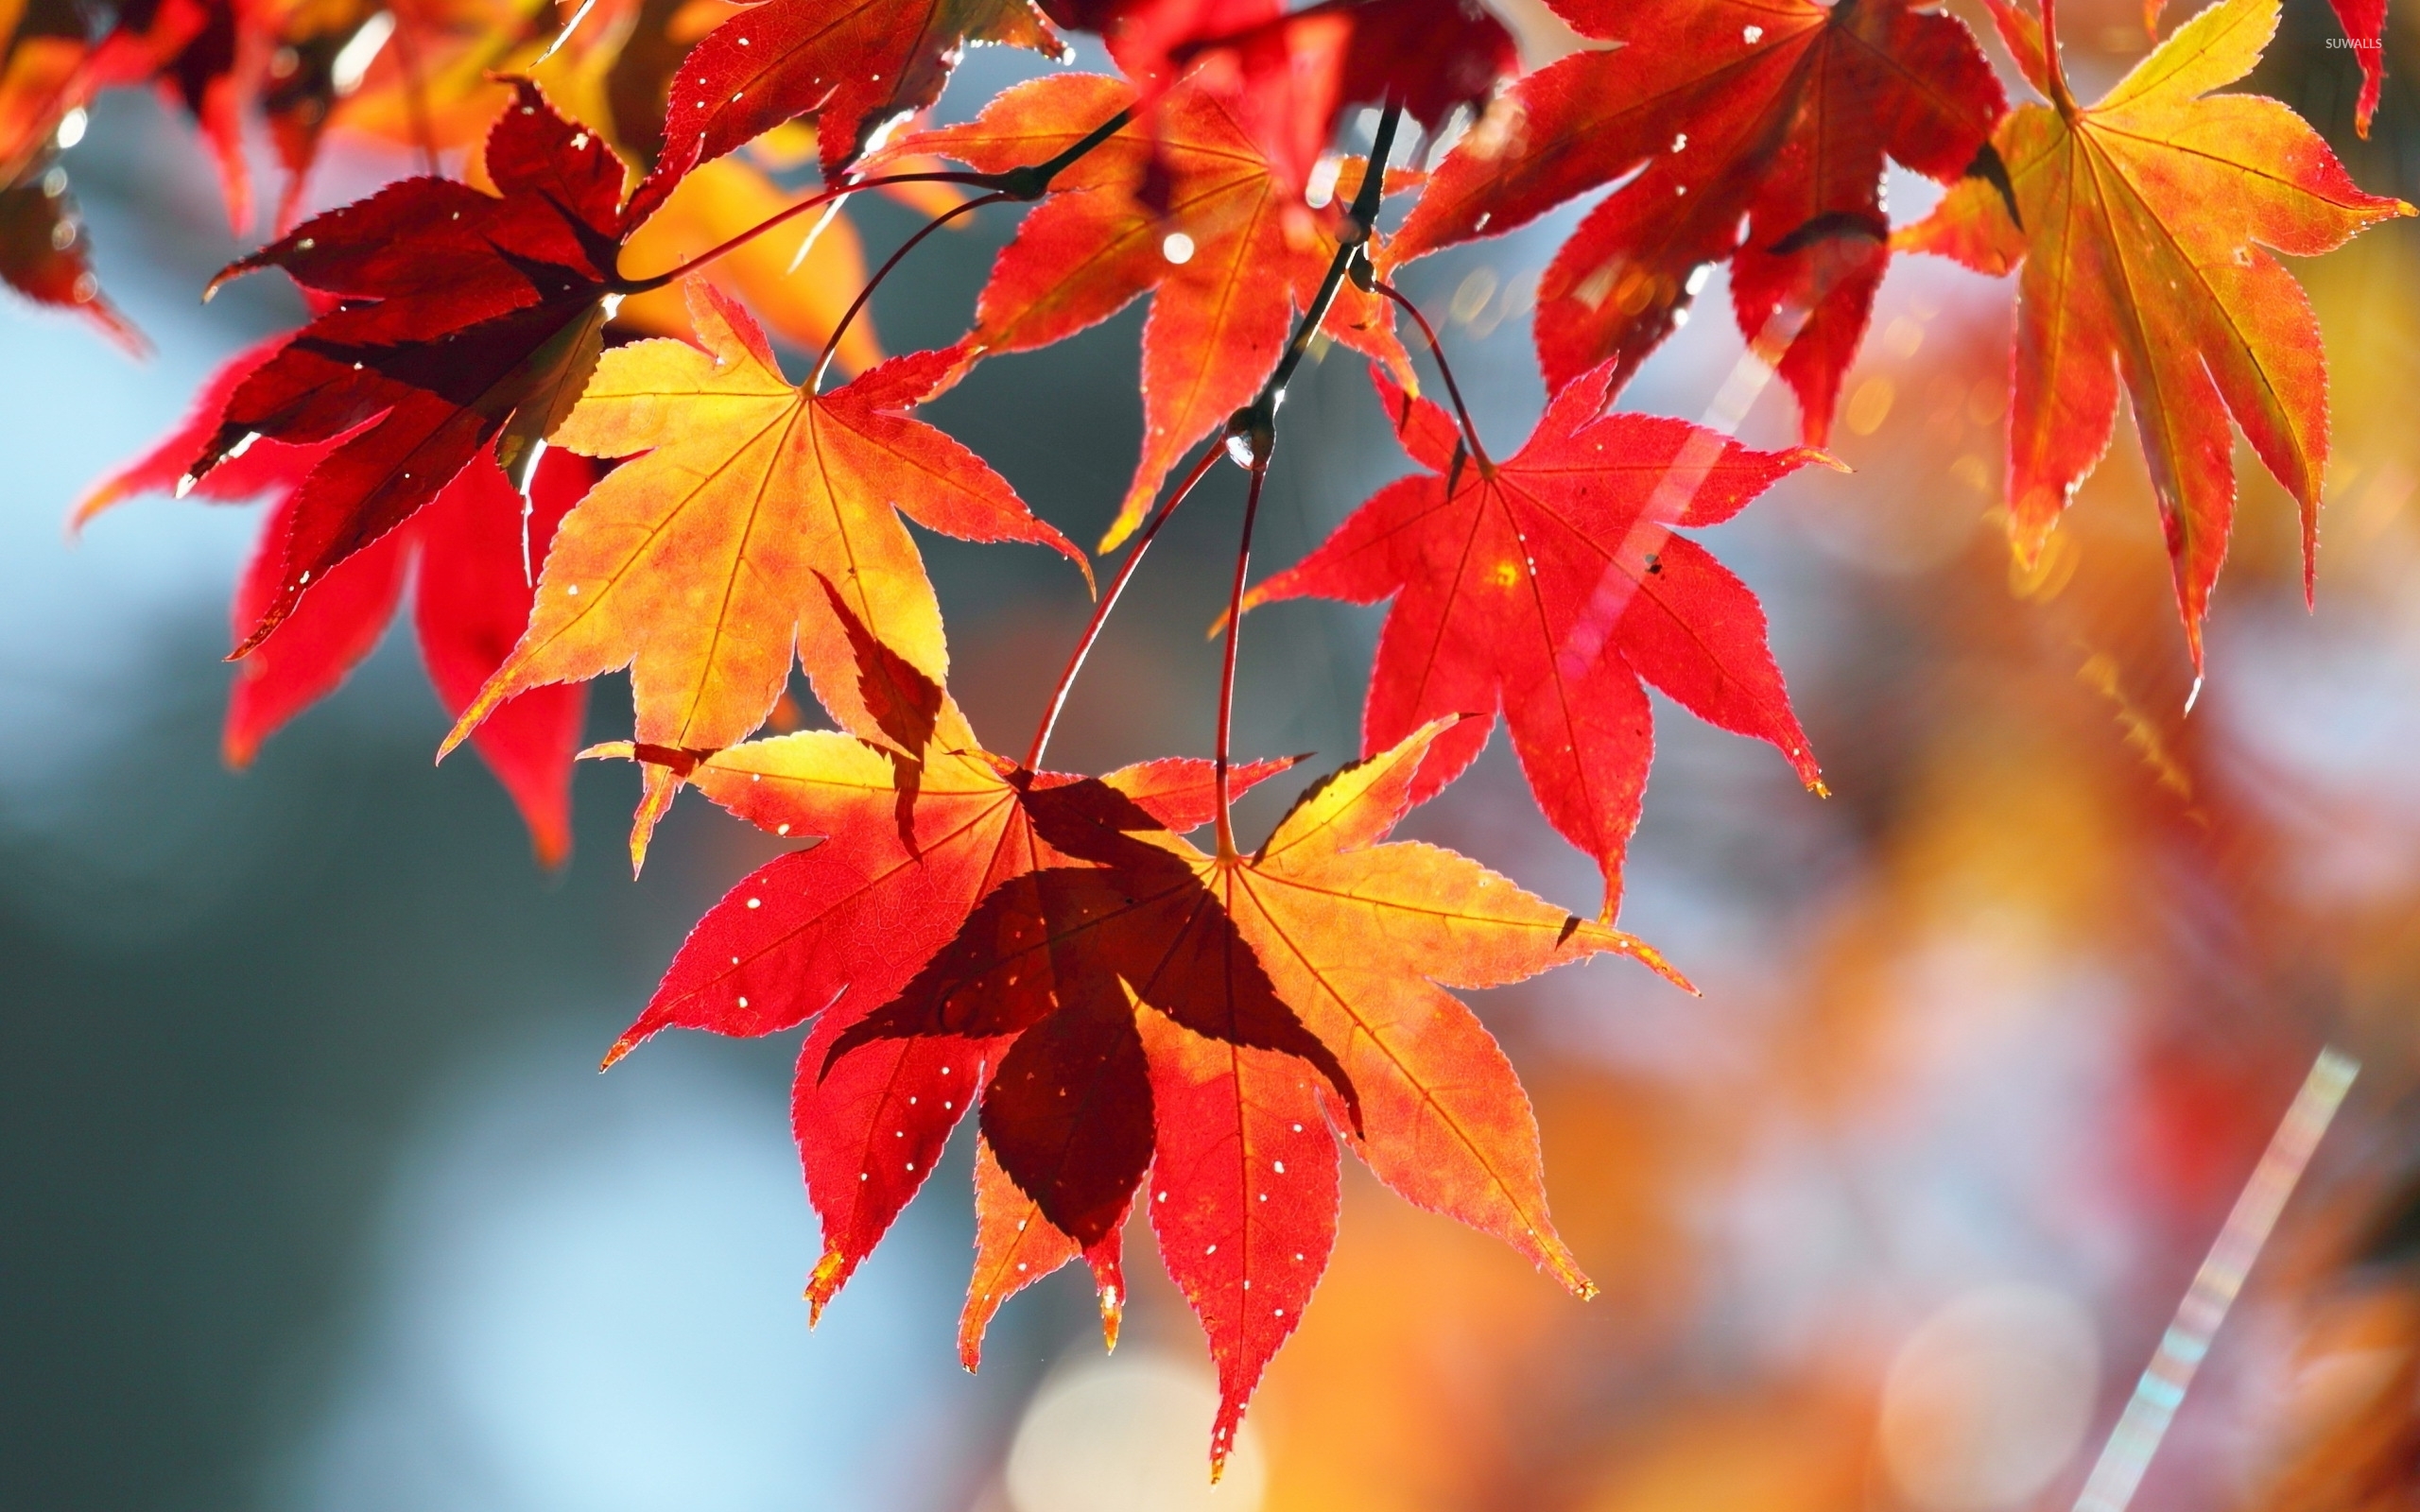 Maple leaves wallpaper - Photography wallpapers - #37471